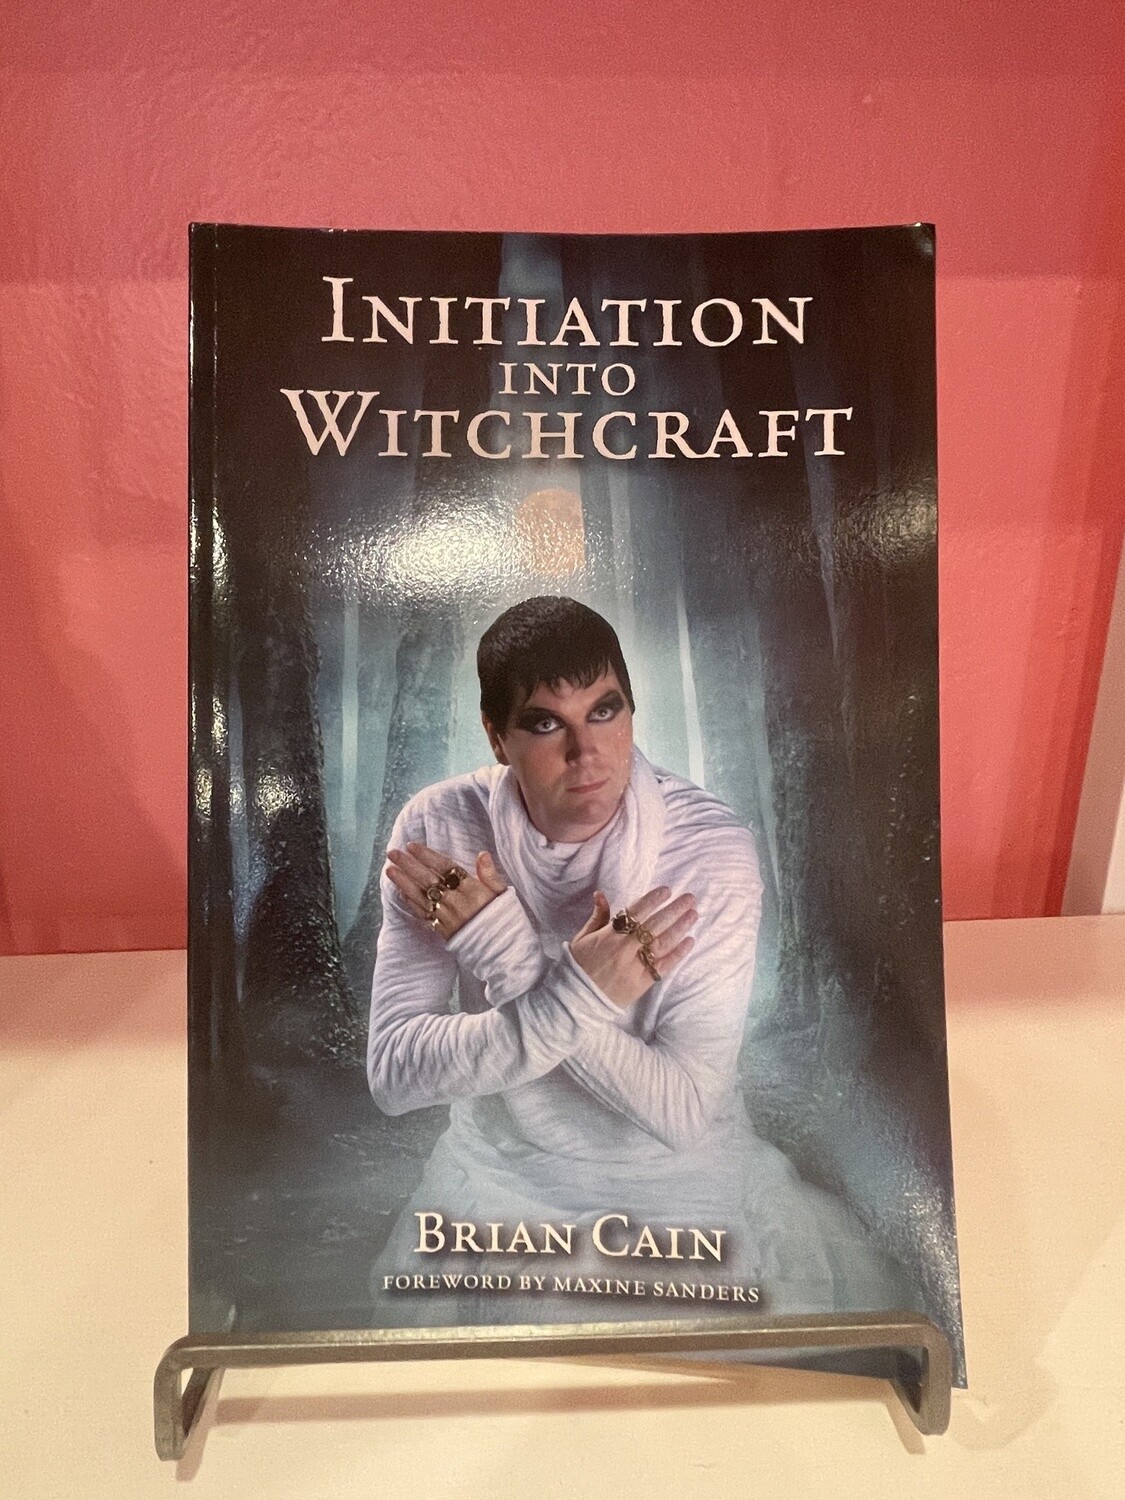 Initiation into Witchcraft